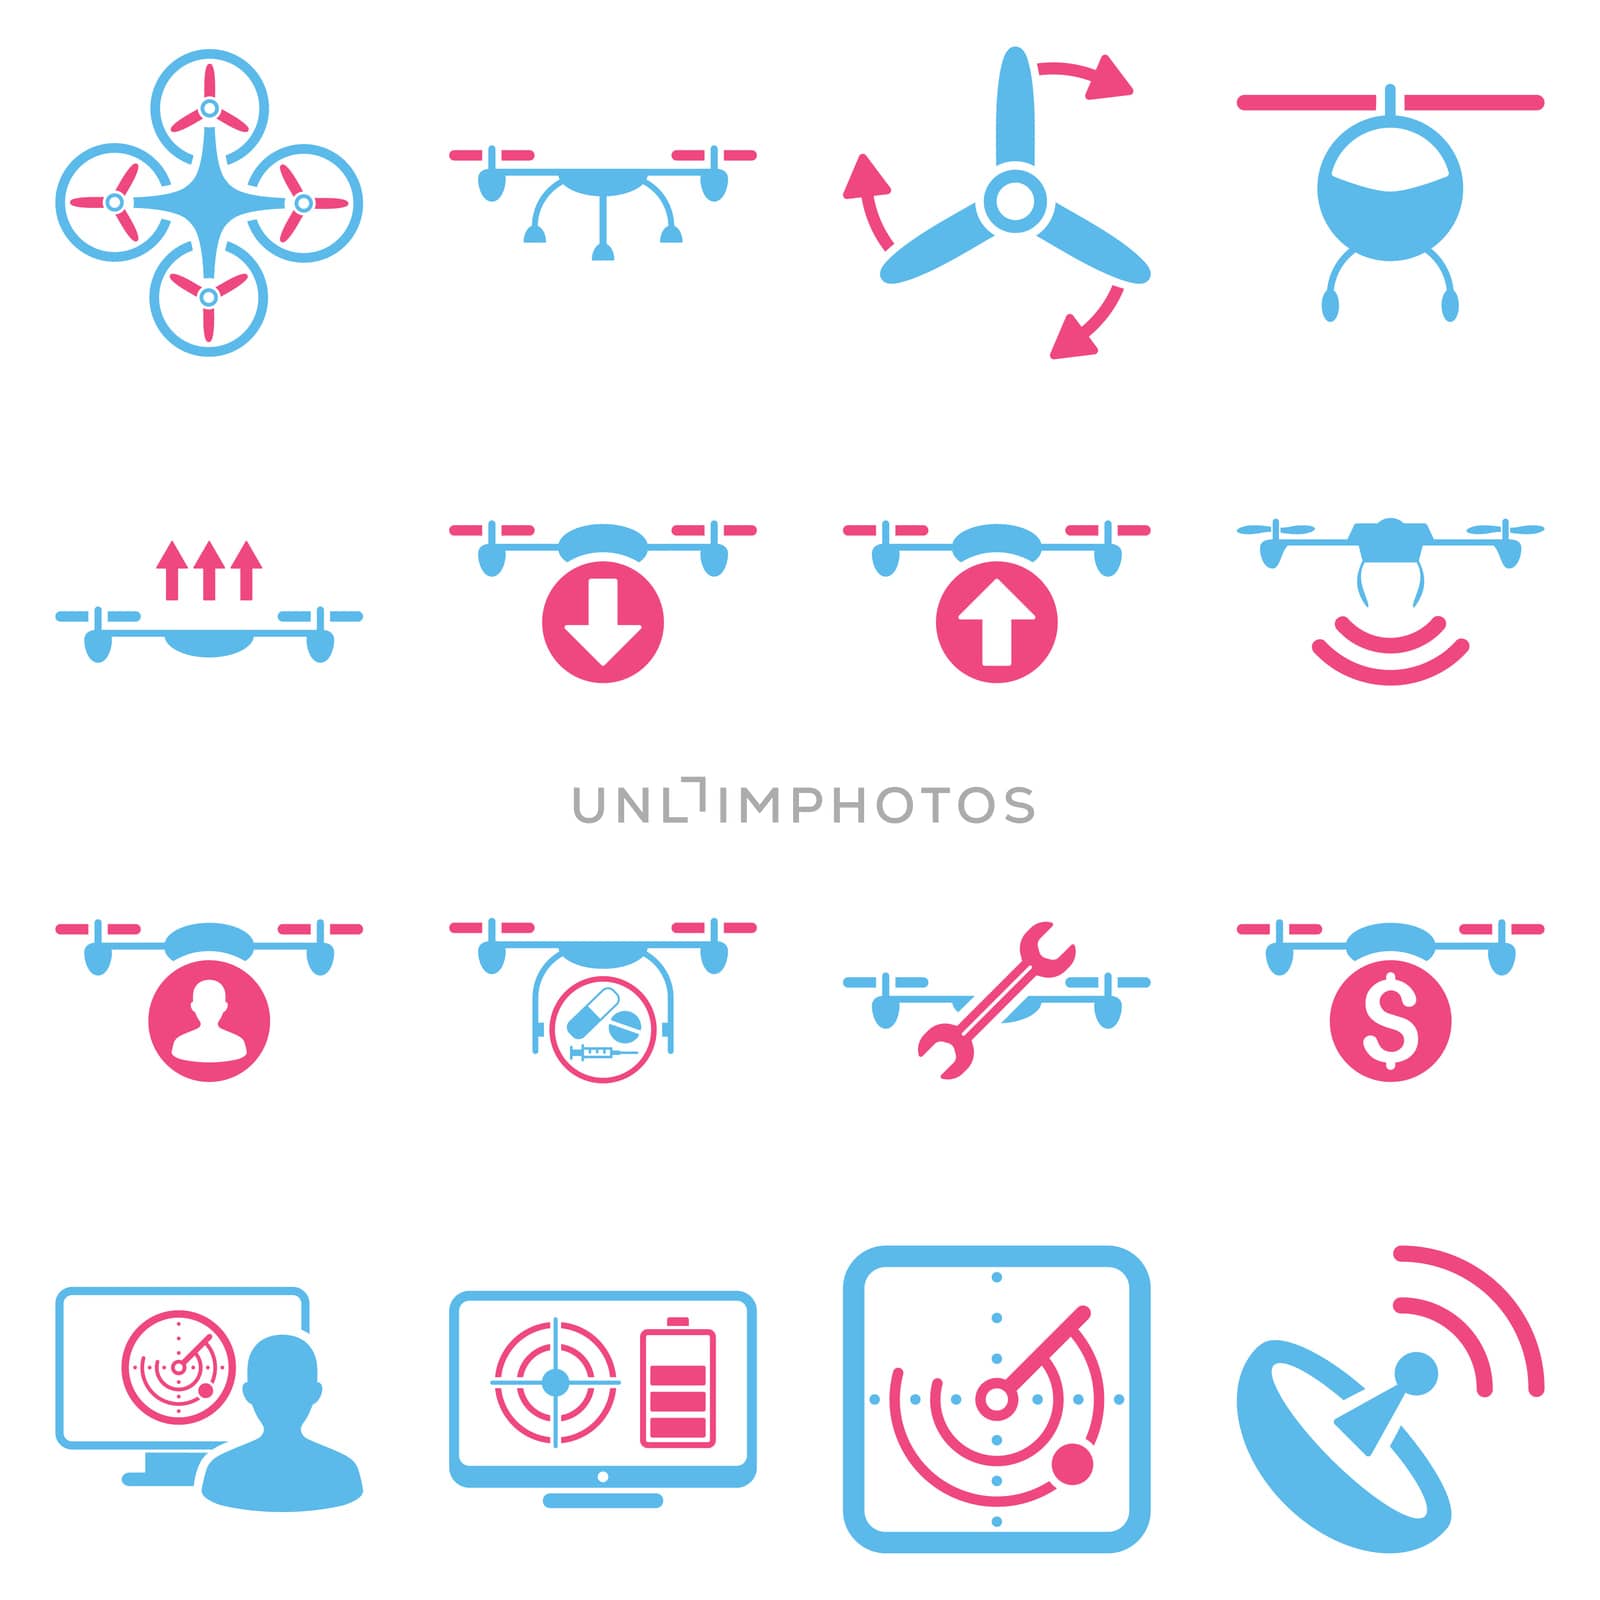 Quadcopter service icon set designed with pink and blue colors. These flat bicolor pictograms are isolated on a white background.